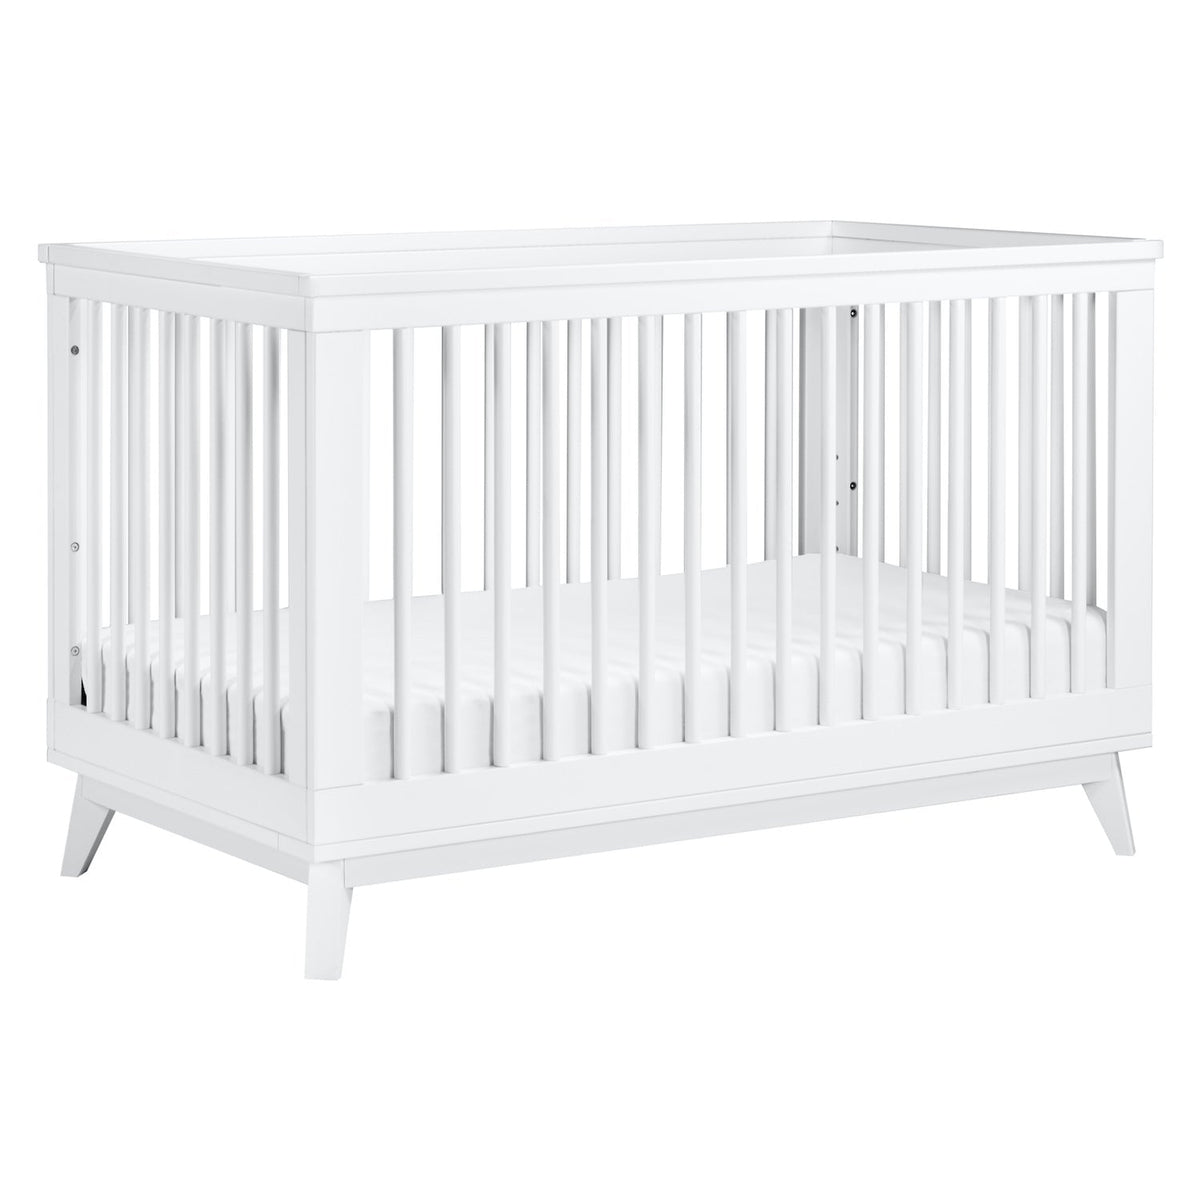 Scoot 3-in-1 Convertible Crib with Toddler Bed Conversion Kit - White - Project Nursery